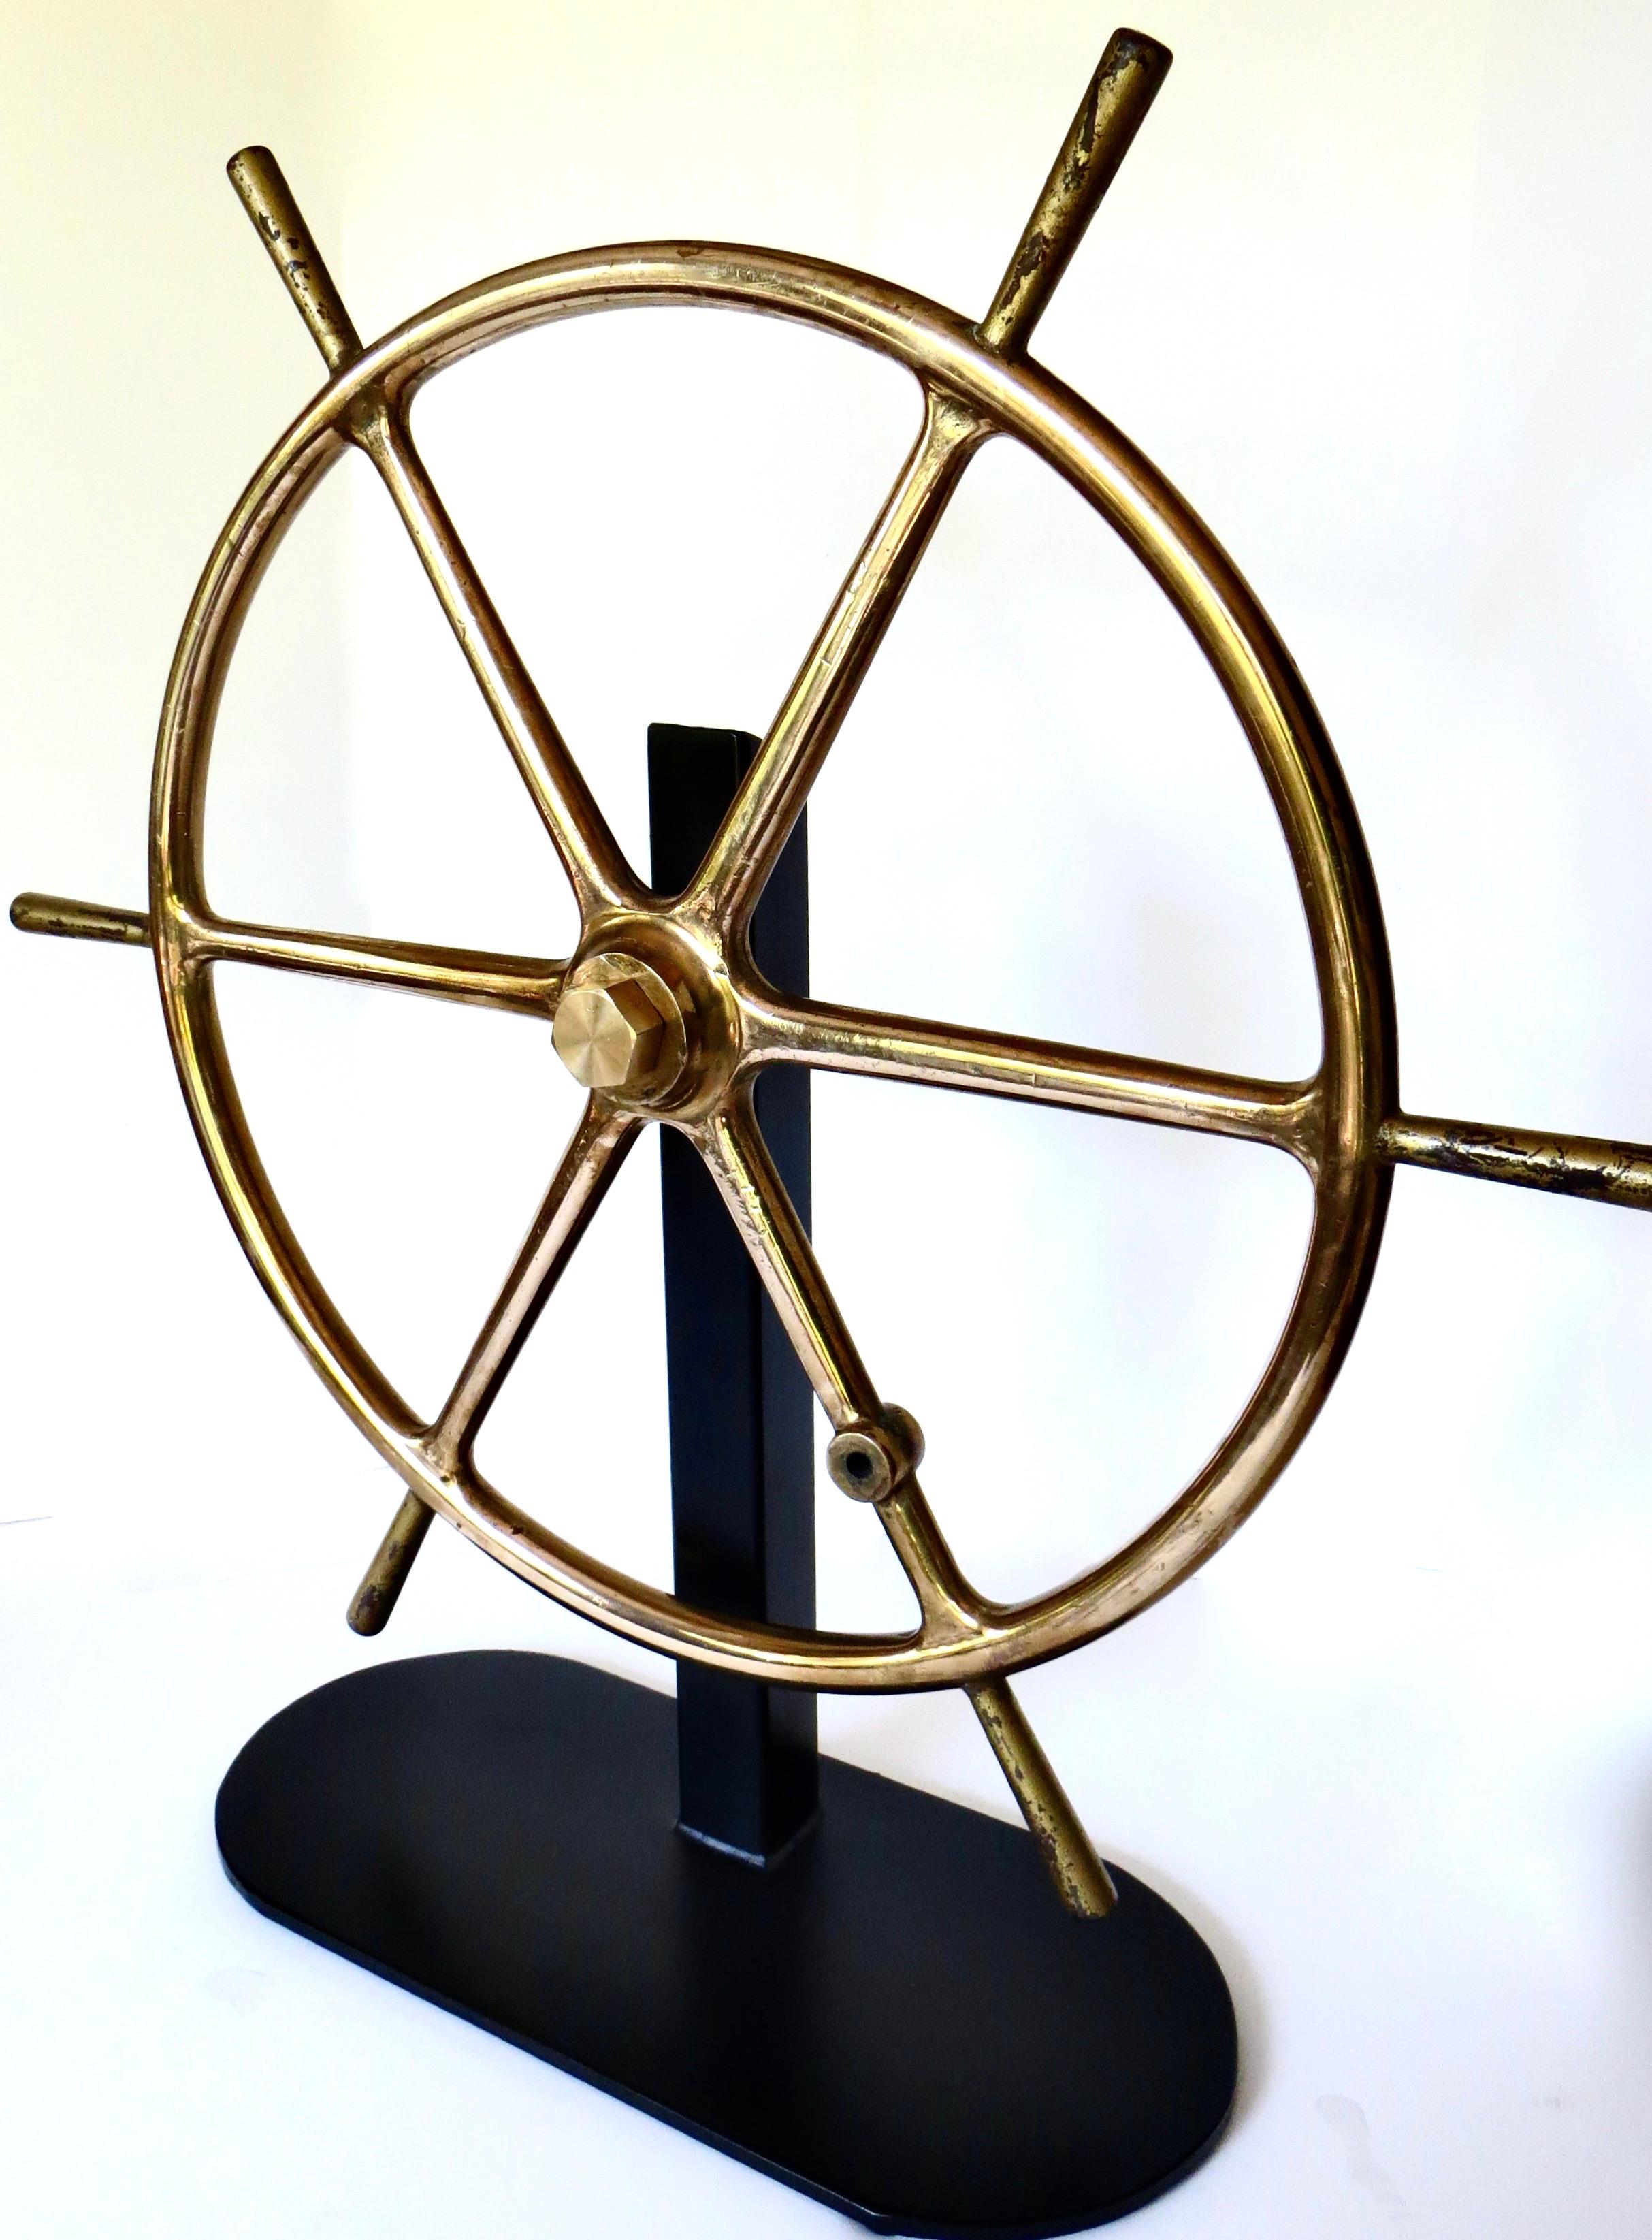 This 19th century American solid brass ship steering wheel was, more than likely, from a yacht. Fishing and commercial boats were more inclined to use cast iron and/or wood; the brass adds an element of luxury. It has a fair amount of weight to it,